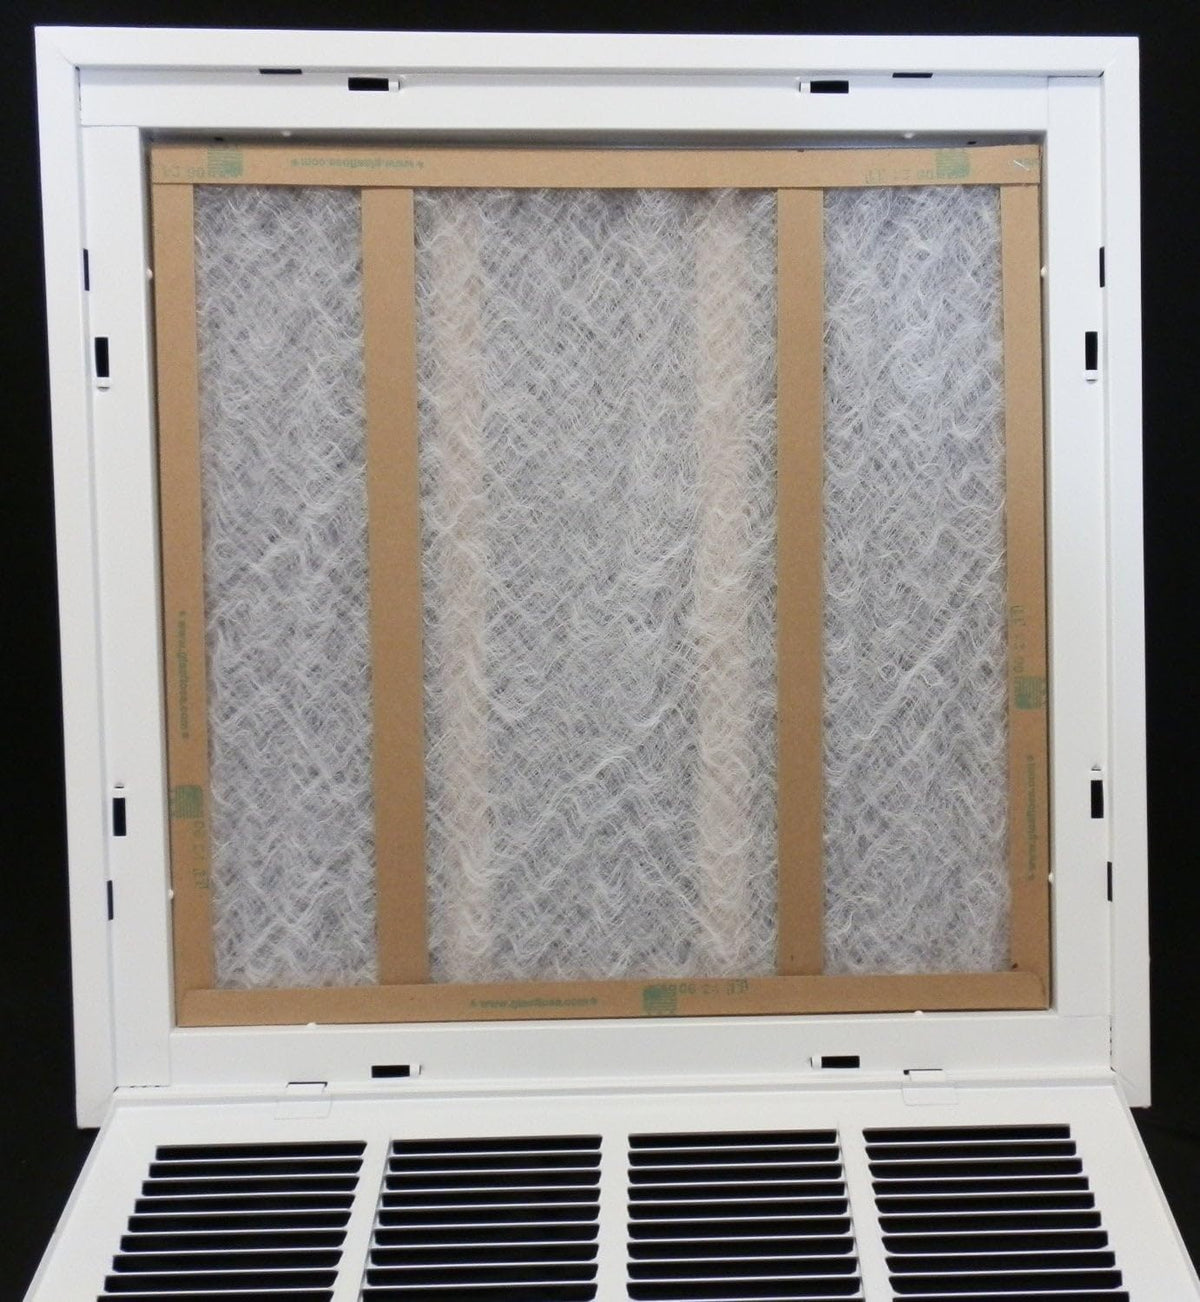 30&quot; X 20&quot; Steel Return Air Filter Grille for 1&quot; Filter - Fixed Hinged - [Outer Dimensions: 32 5/8&quot; X 22 5/8&quot;]